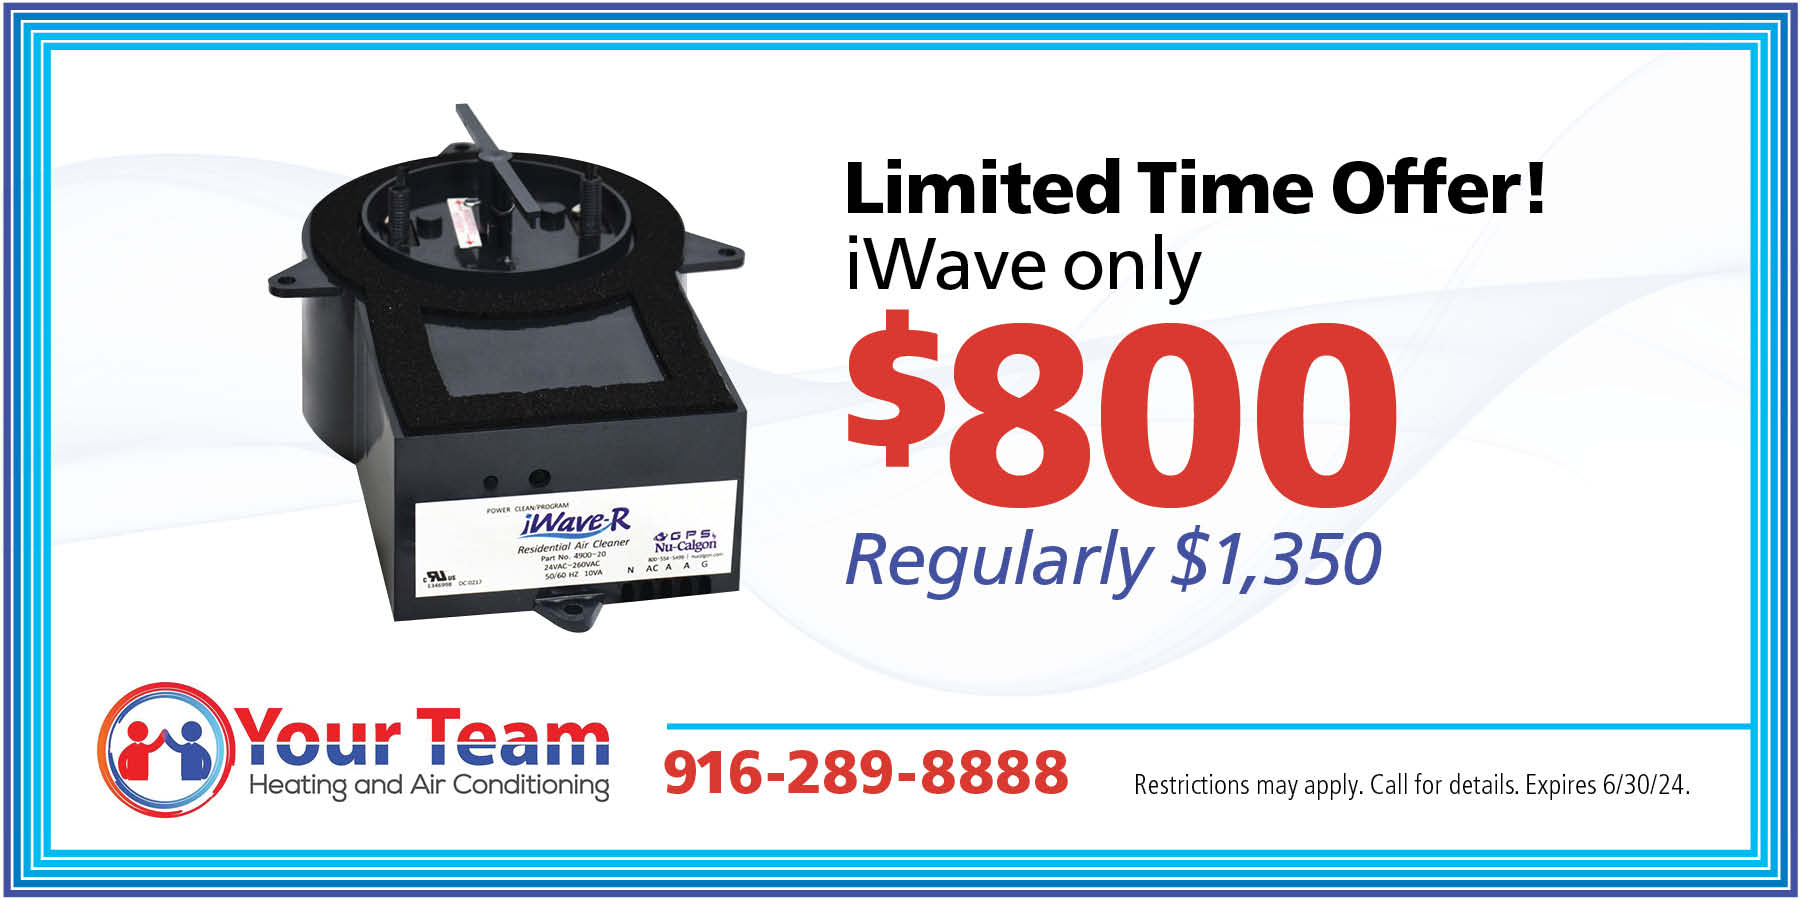 Limited time offer! iWave only $800, regularly $1,350.